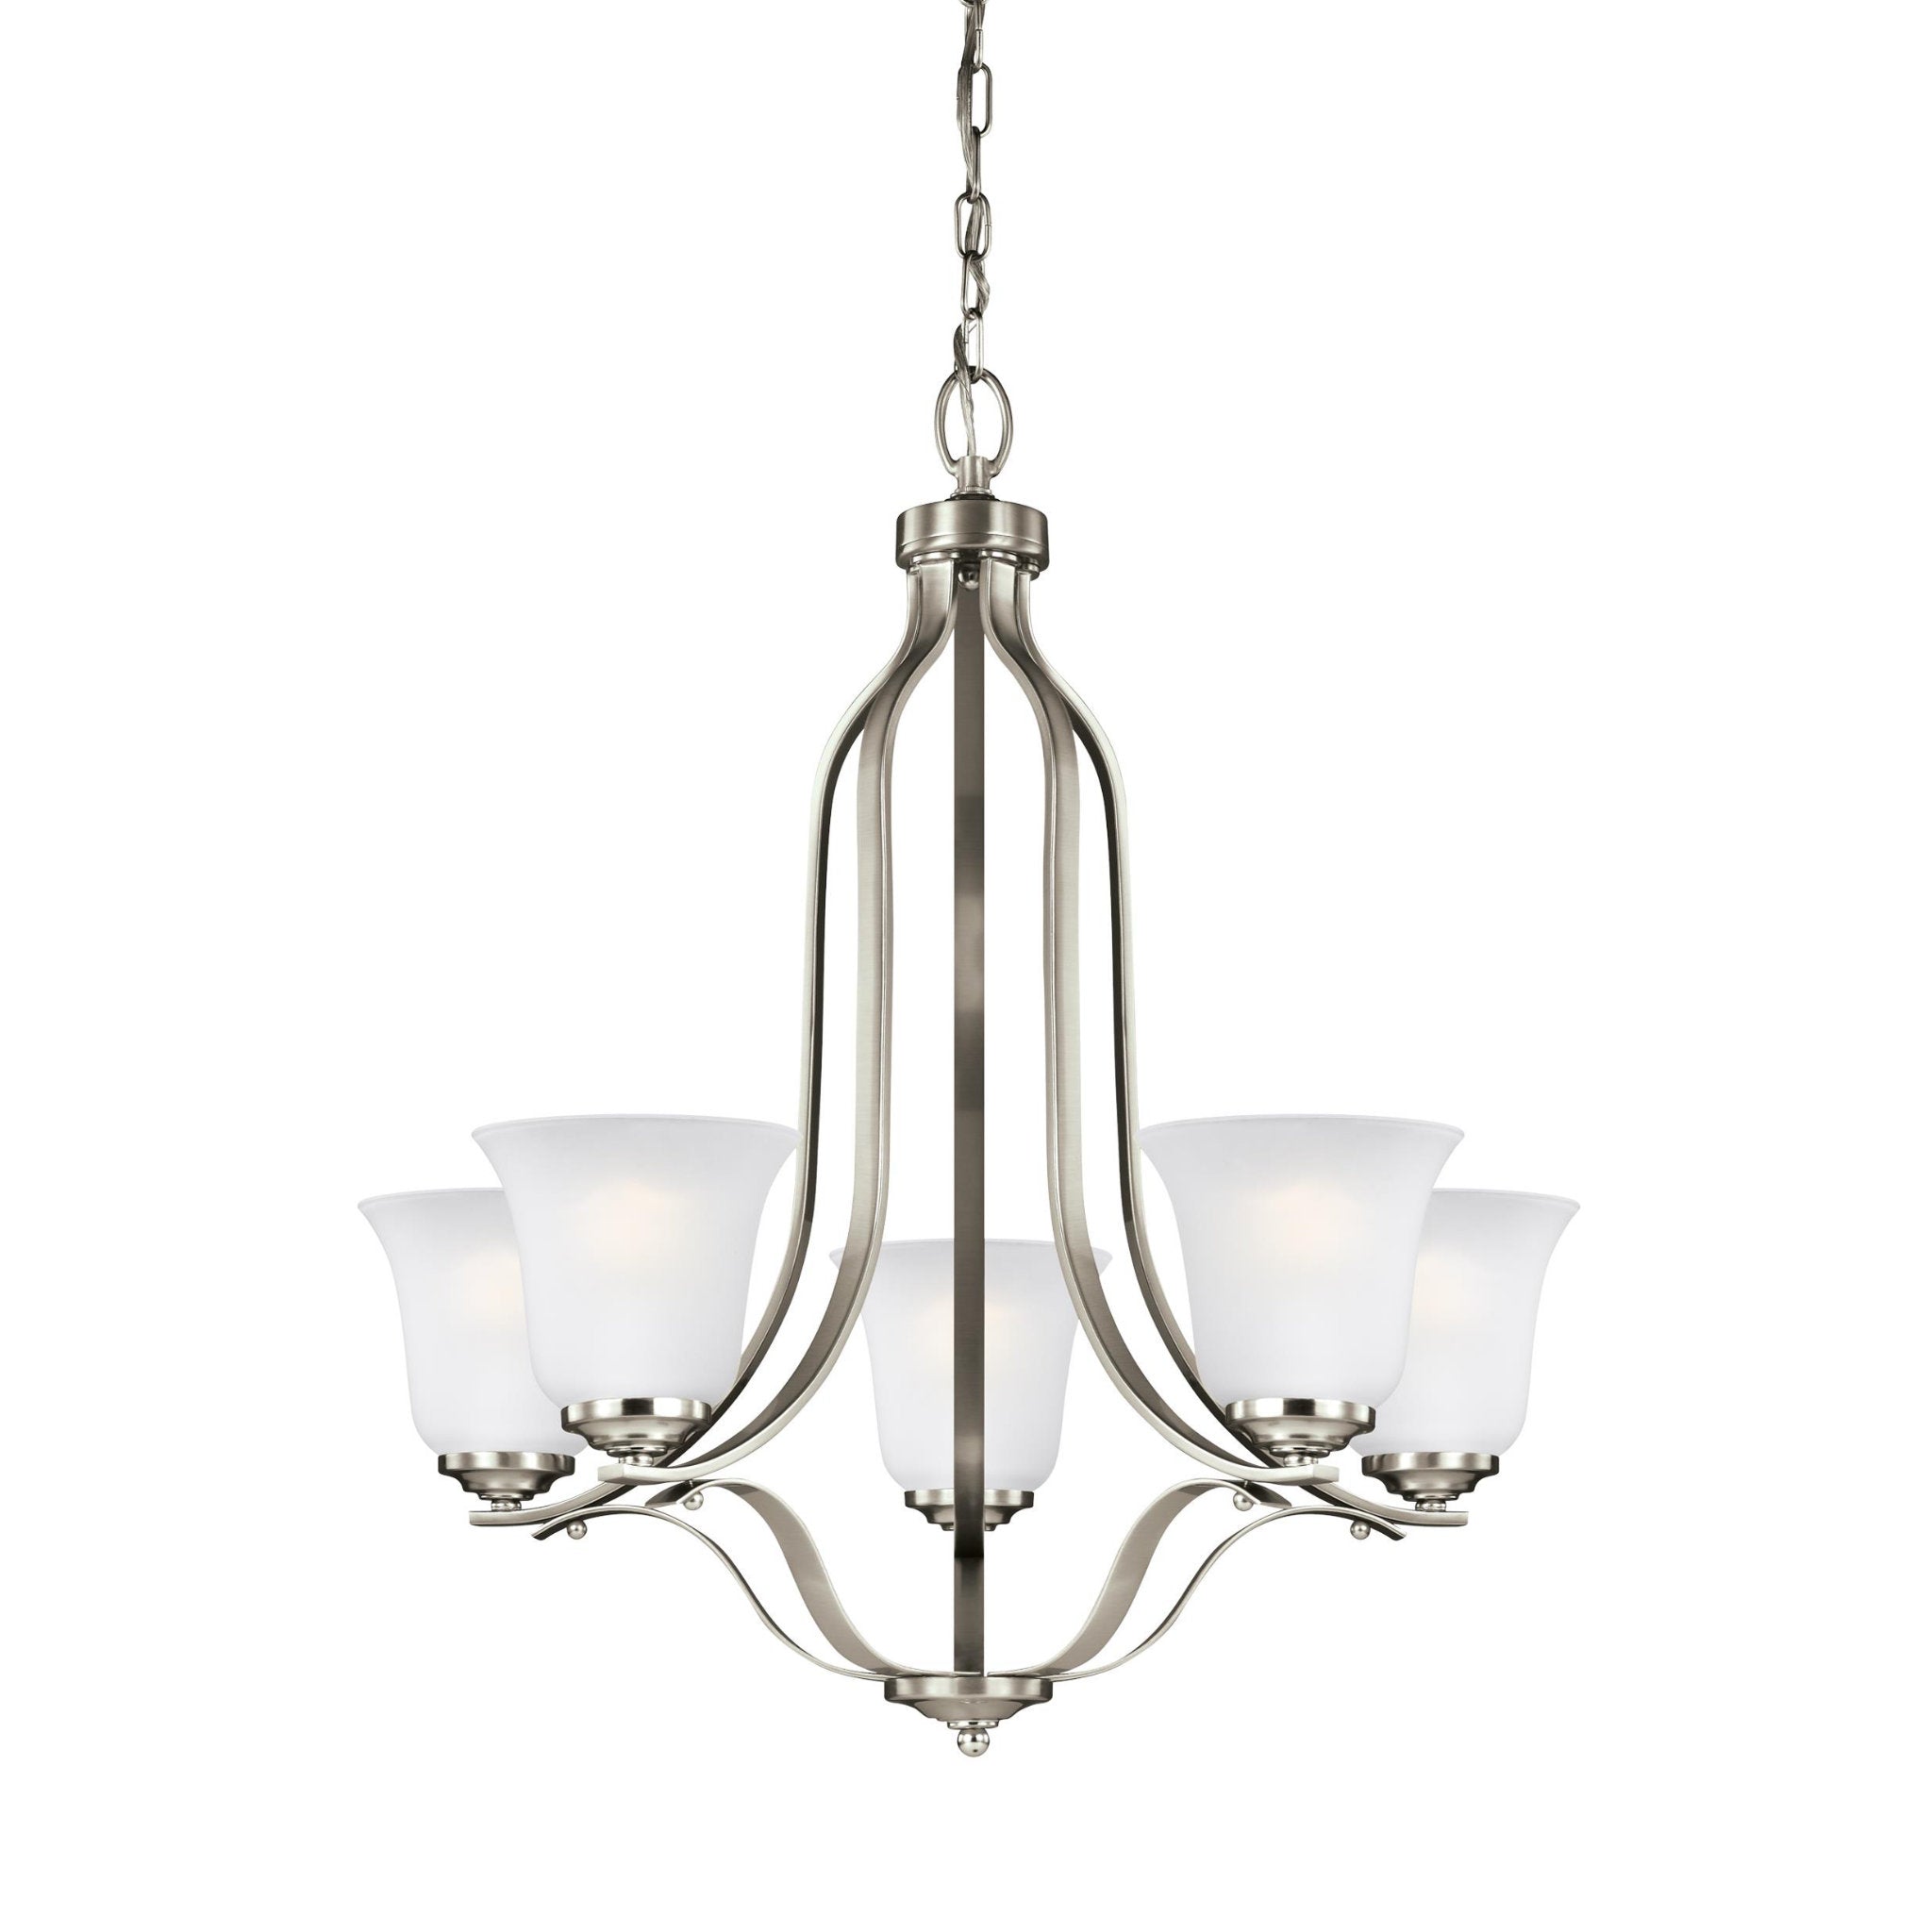 Emmons Five Light Chandelier LED Traditional 26.75" Height Steel Round Satin Etched Shade in Brushed Nickel